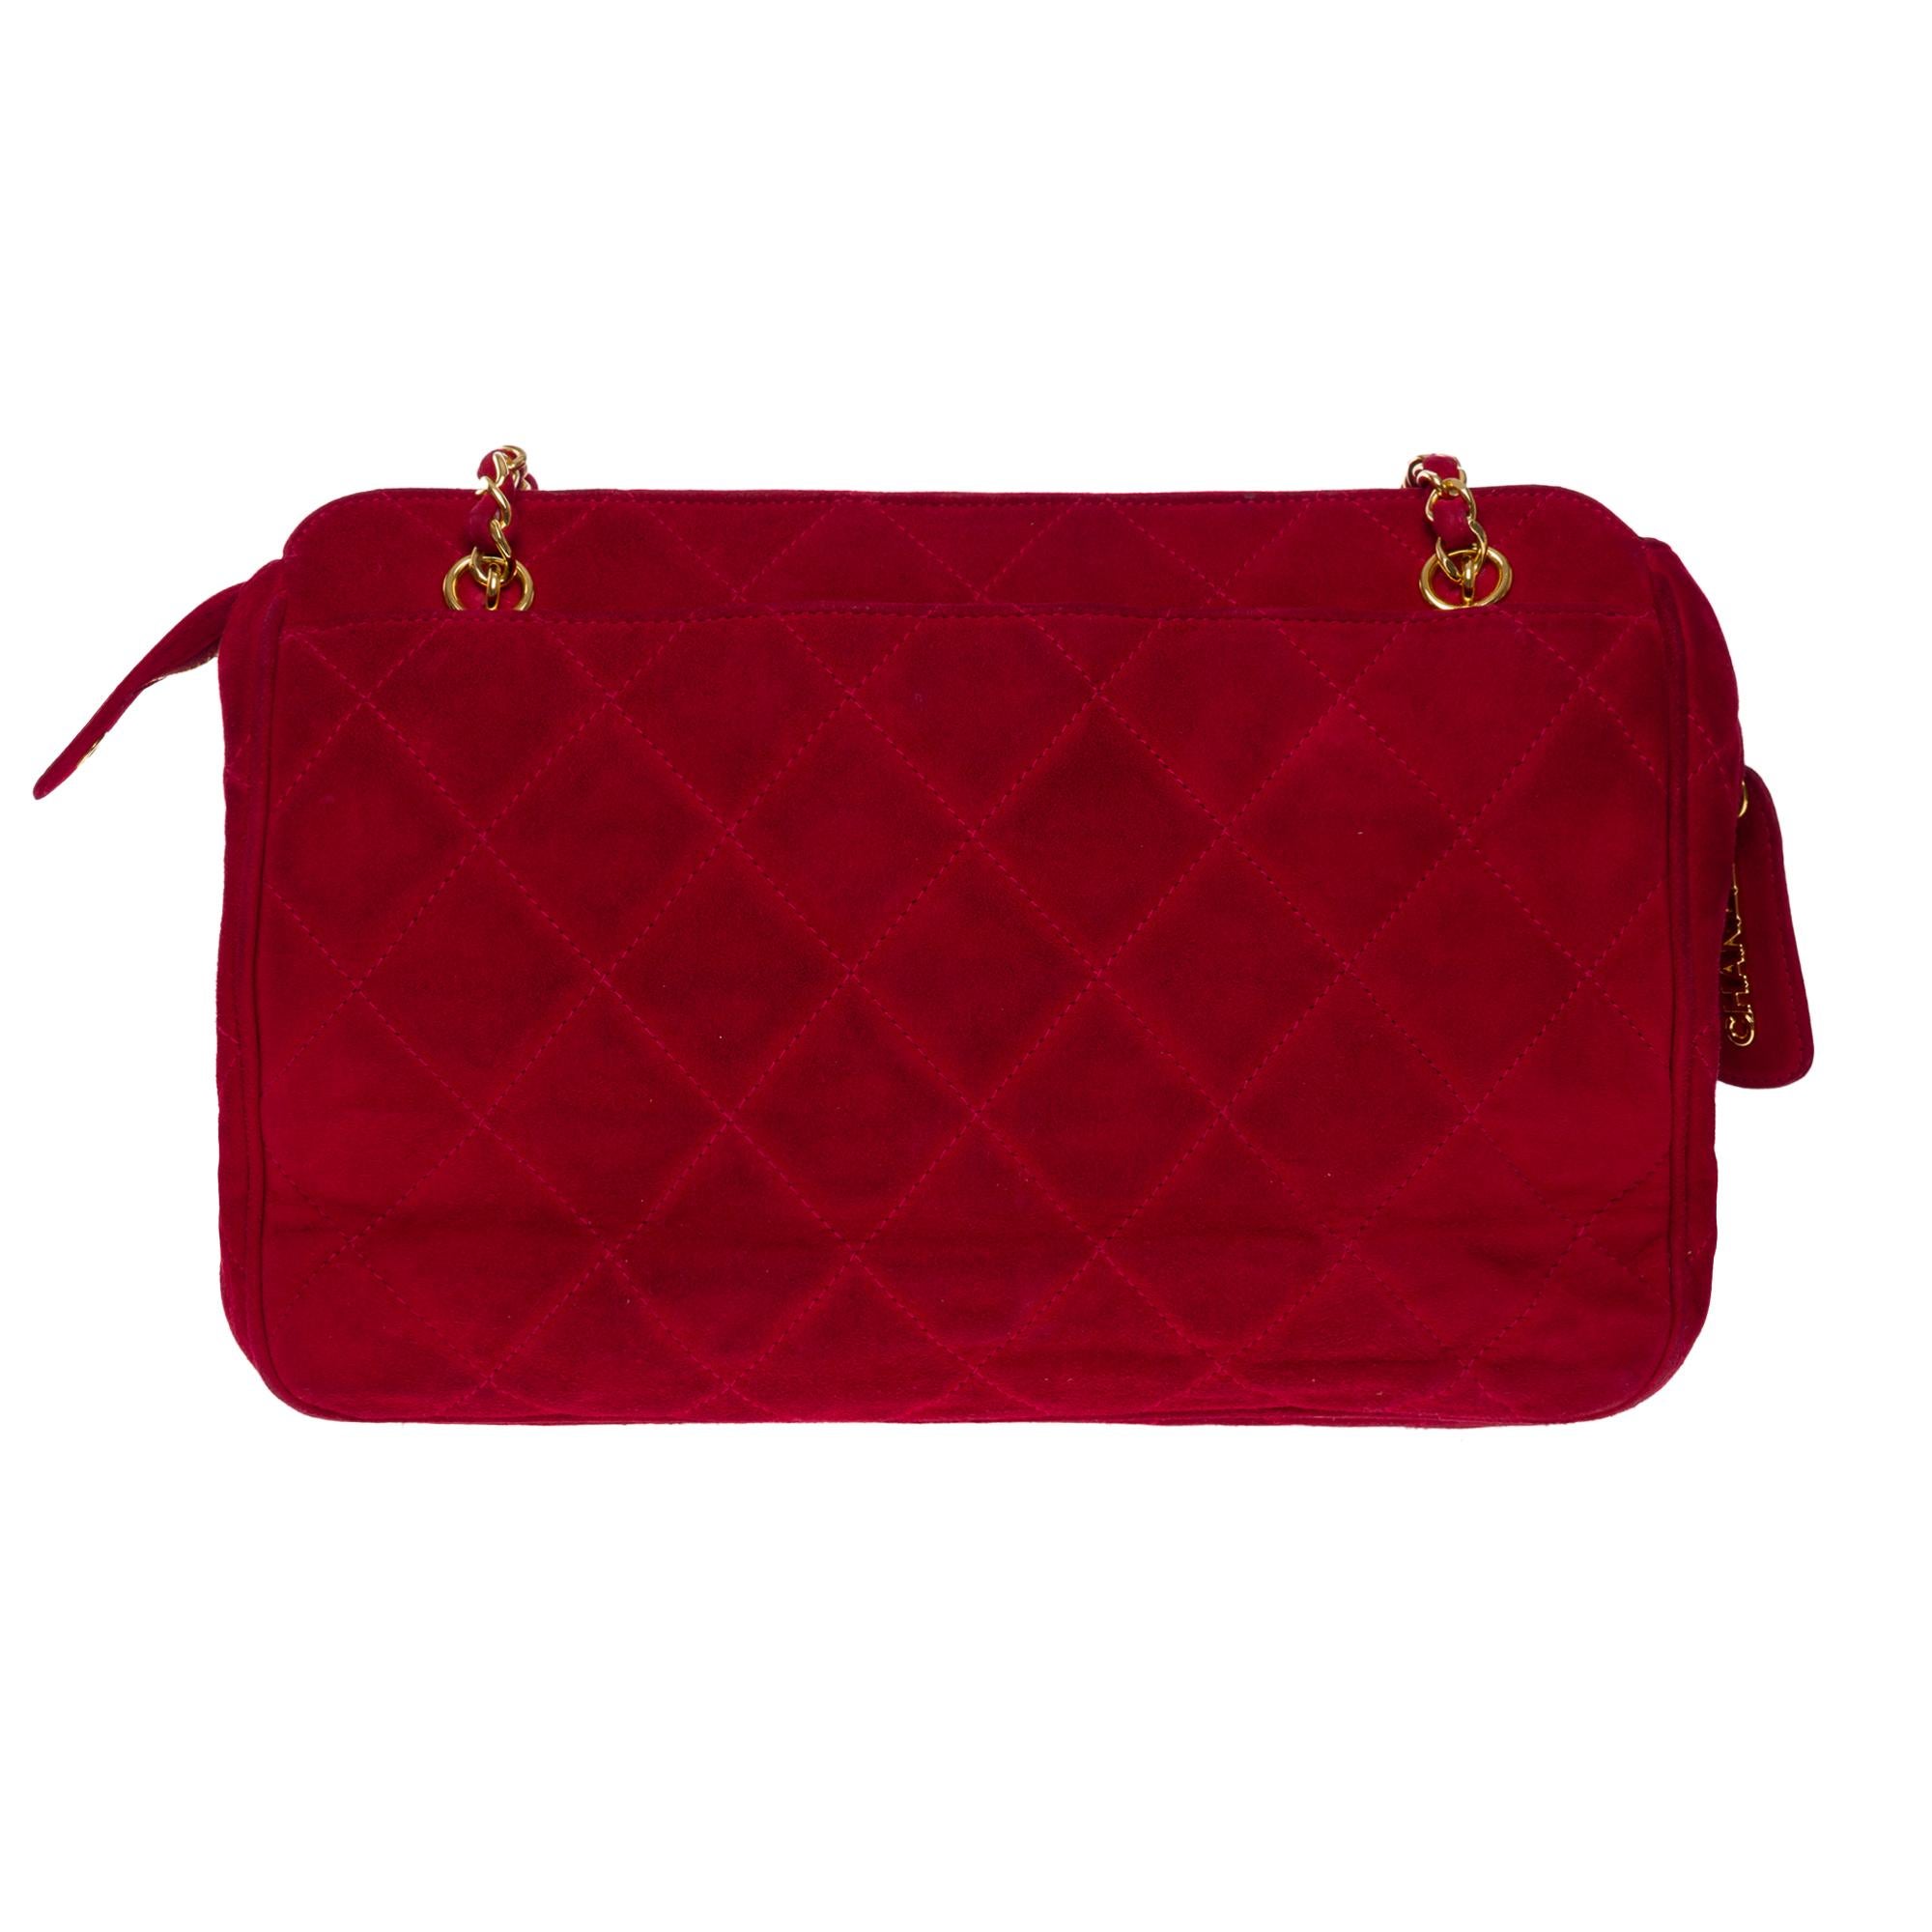 Gorgeous Chanel Camera shoulder bag in red suede , a gold metal chain handle interwoven with red suede for a hand, shoulder or crossbody carry

Top zipper closure
Gold-plated metal clasp
A patch pocket at the back of the bag
Black leather lining,